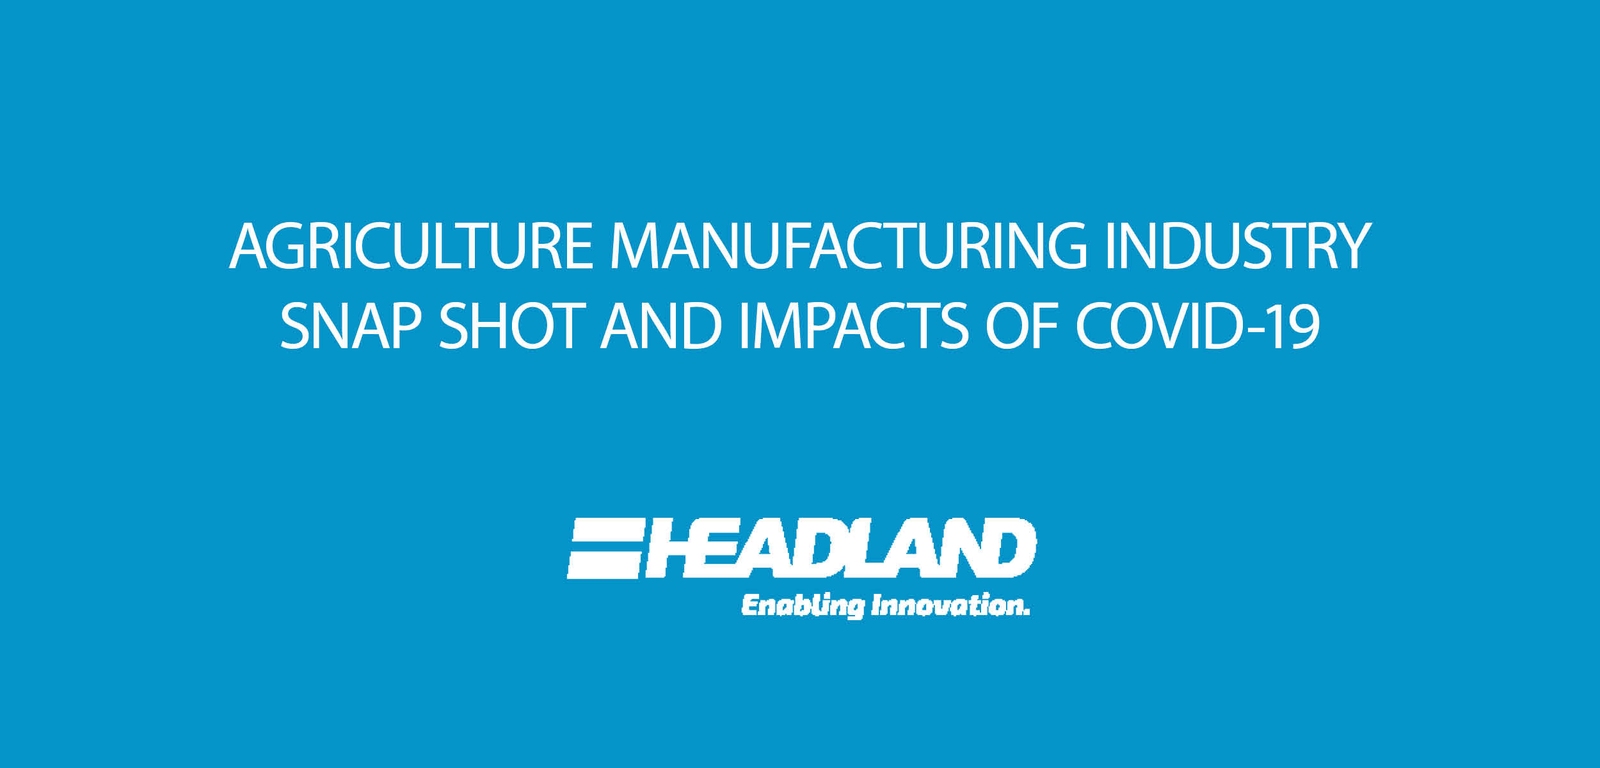 Agricultural Machinery Manufacturing in Australia and Impacts of COVID-19 